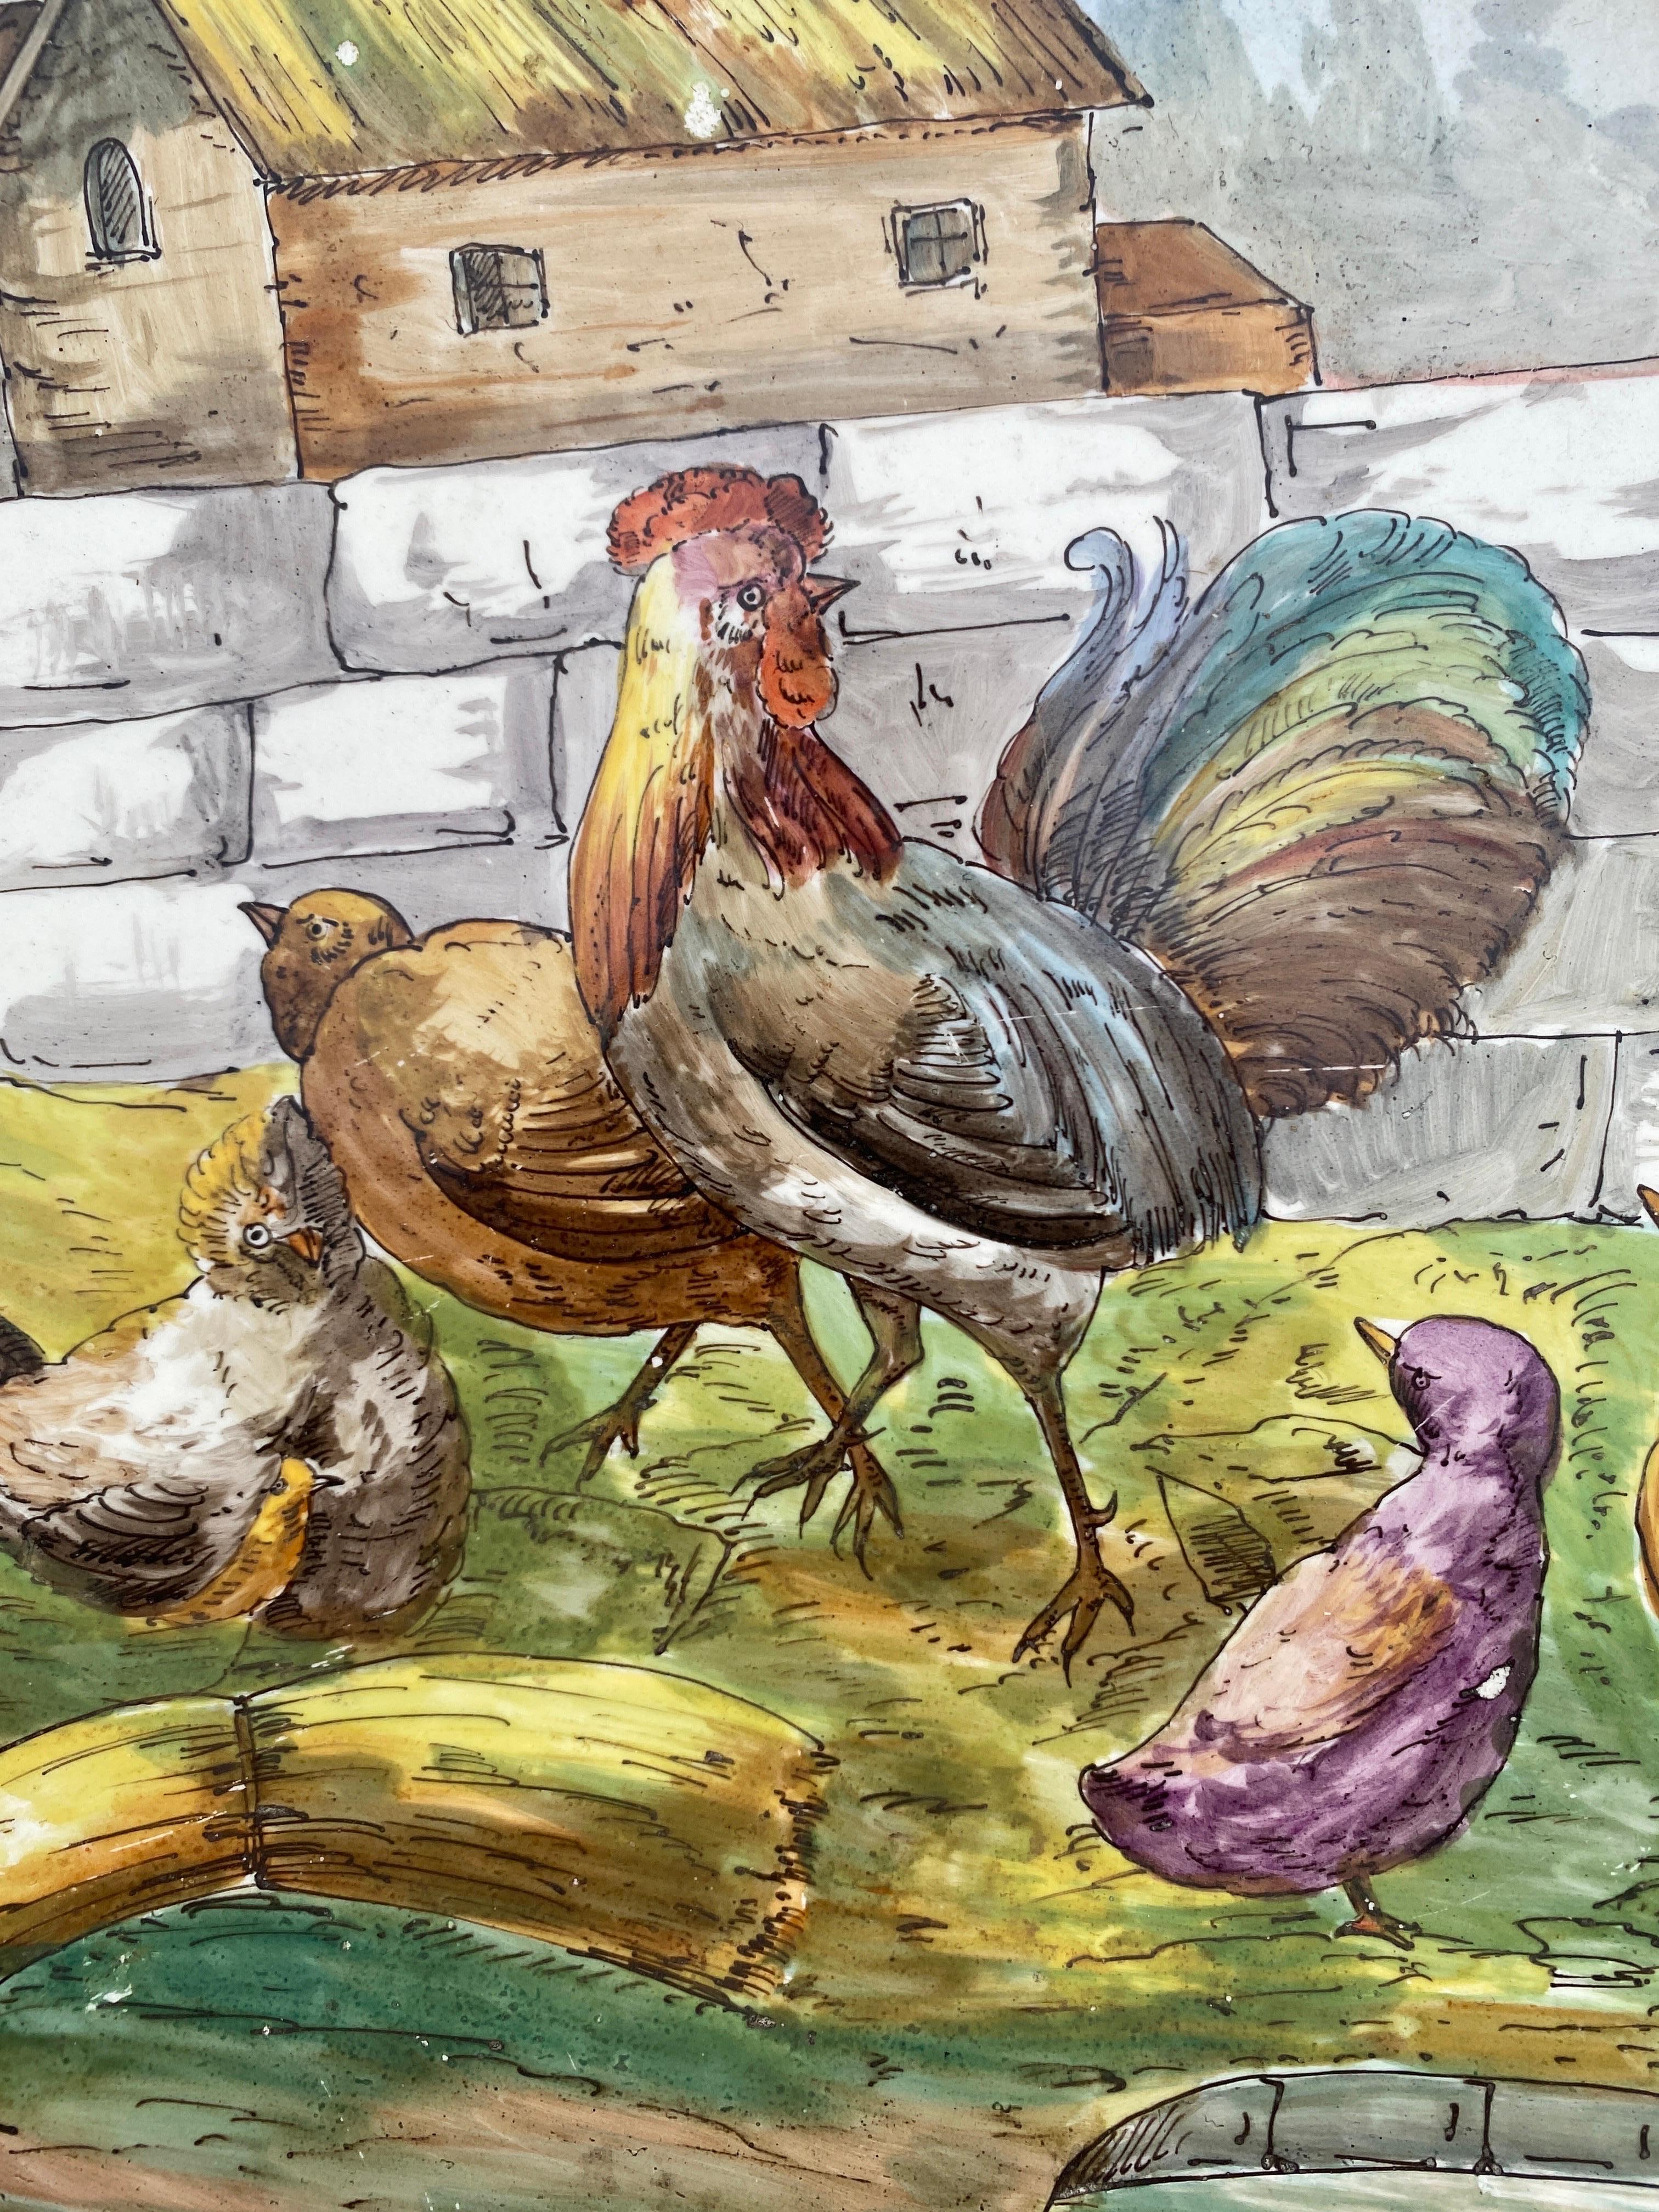 Large French faience rustic platter with farmyard scene, circa 1890.
Rooster, hen annd chicks.
Possibly Sarreguemines.
Measure: 15 inches diameter.